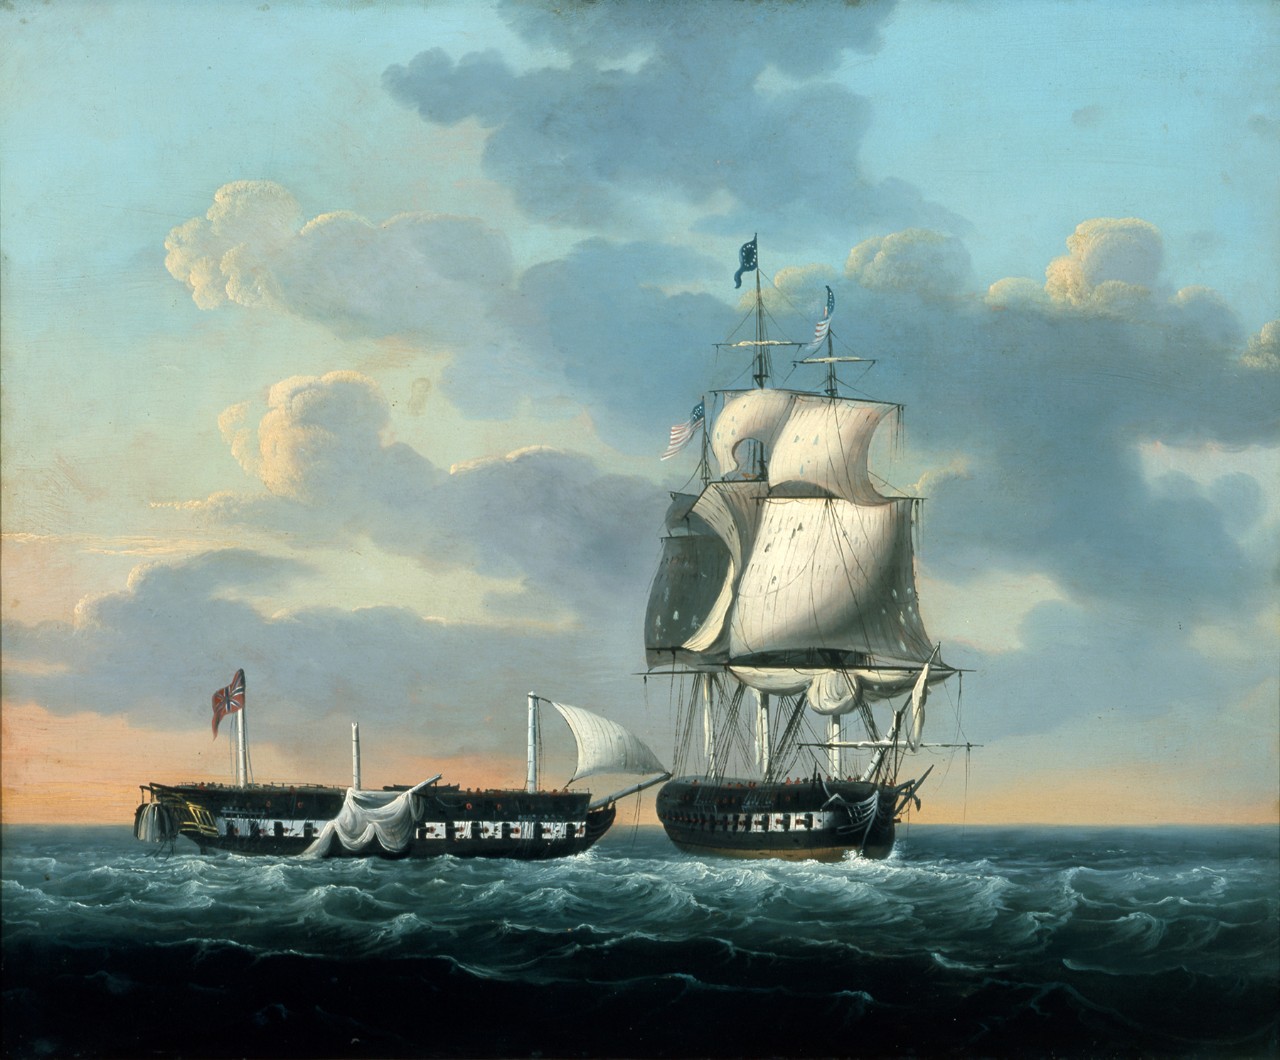 The aftermath of a ship battle, the British ship on the left has lost all of its masts, the American ship is on the right with the sun is setting